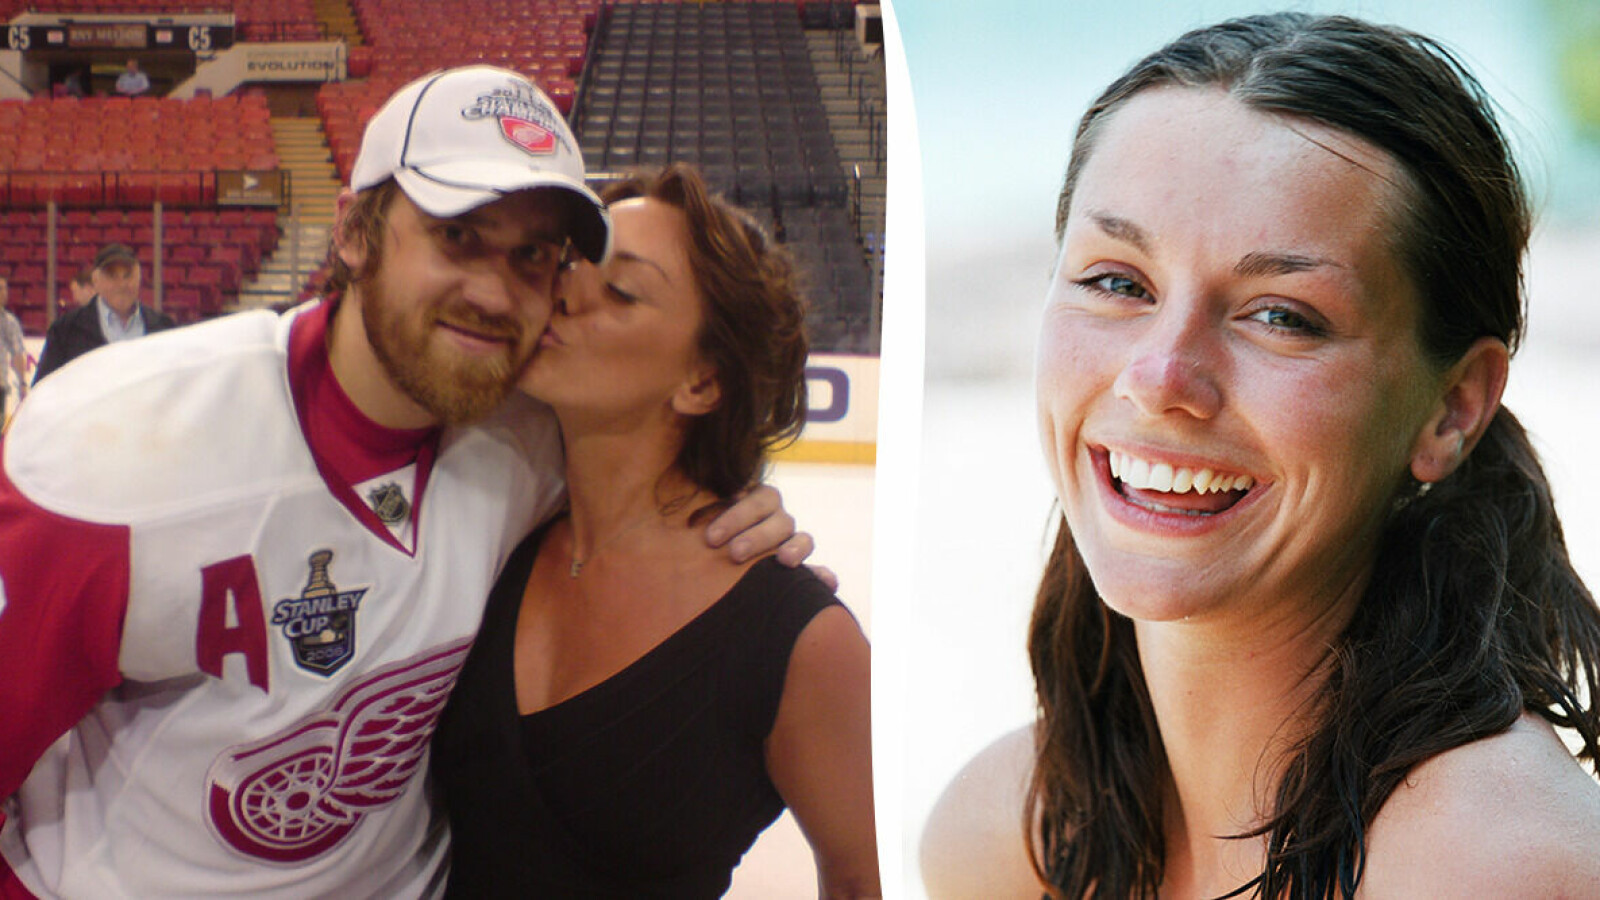 NHL WAGs — Henrik Zetterberg and his wife Emma